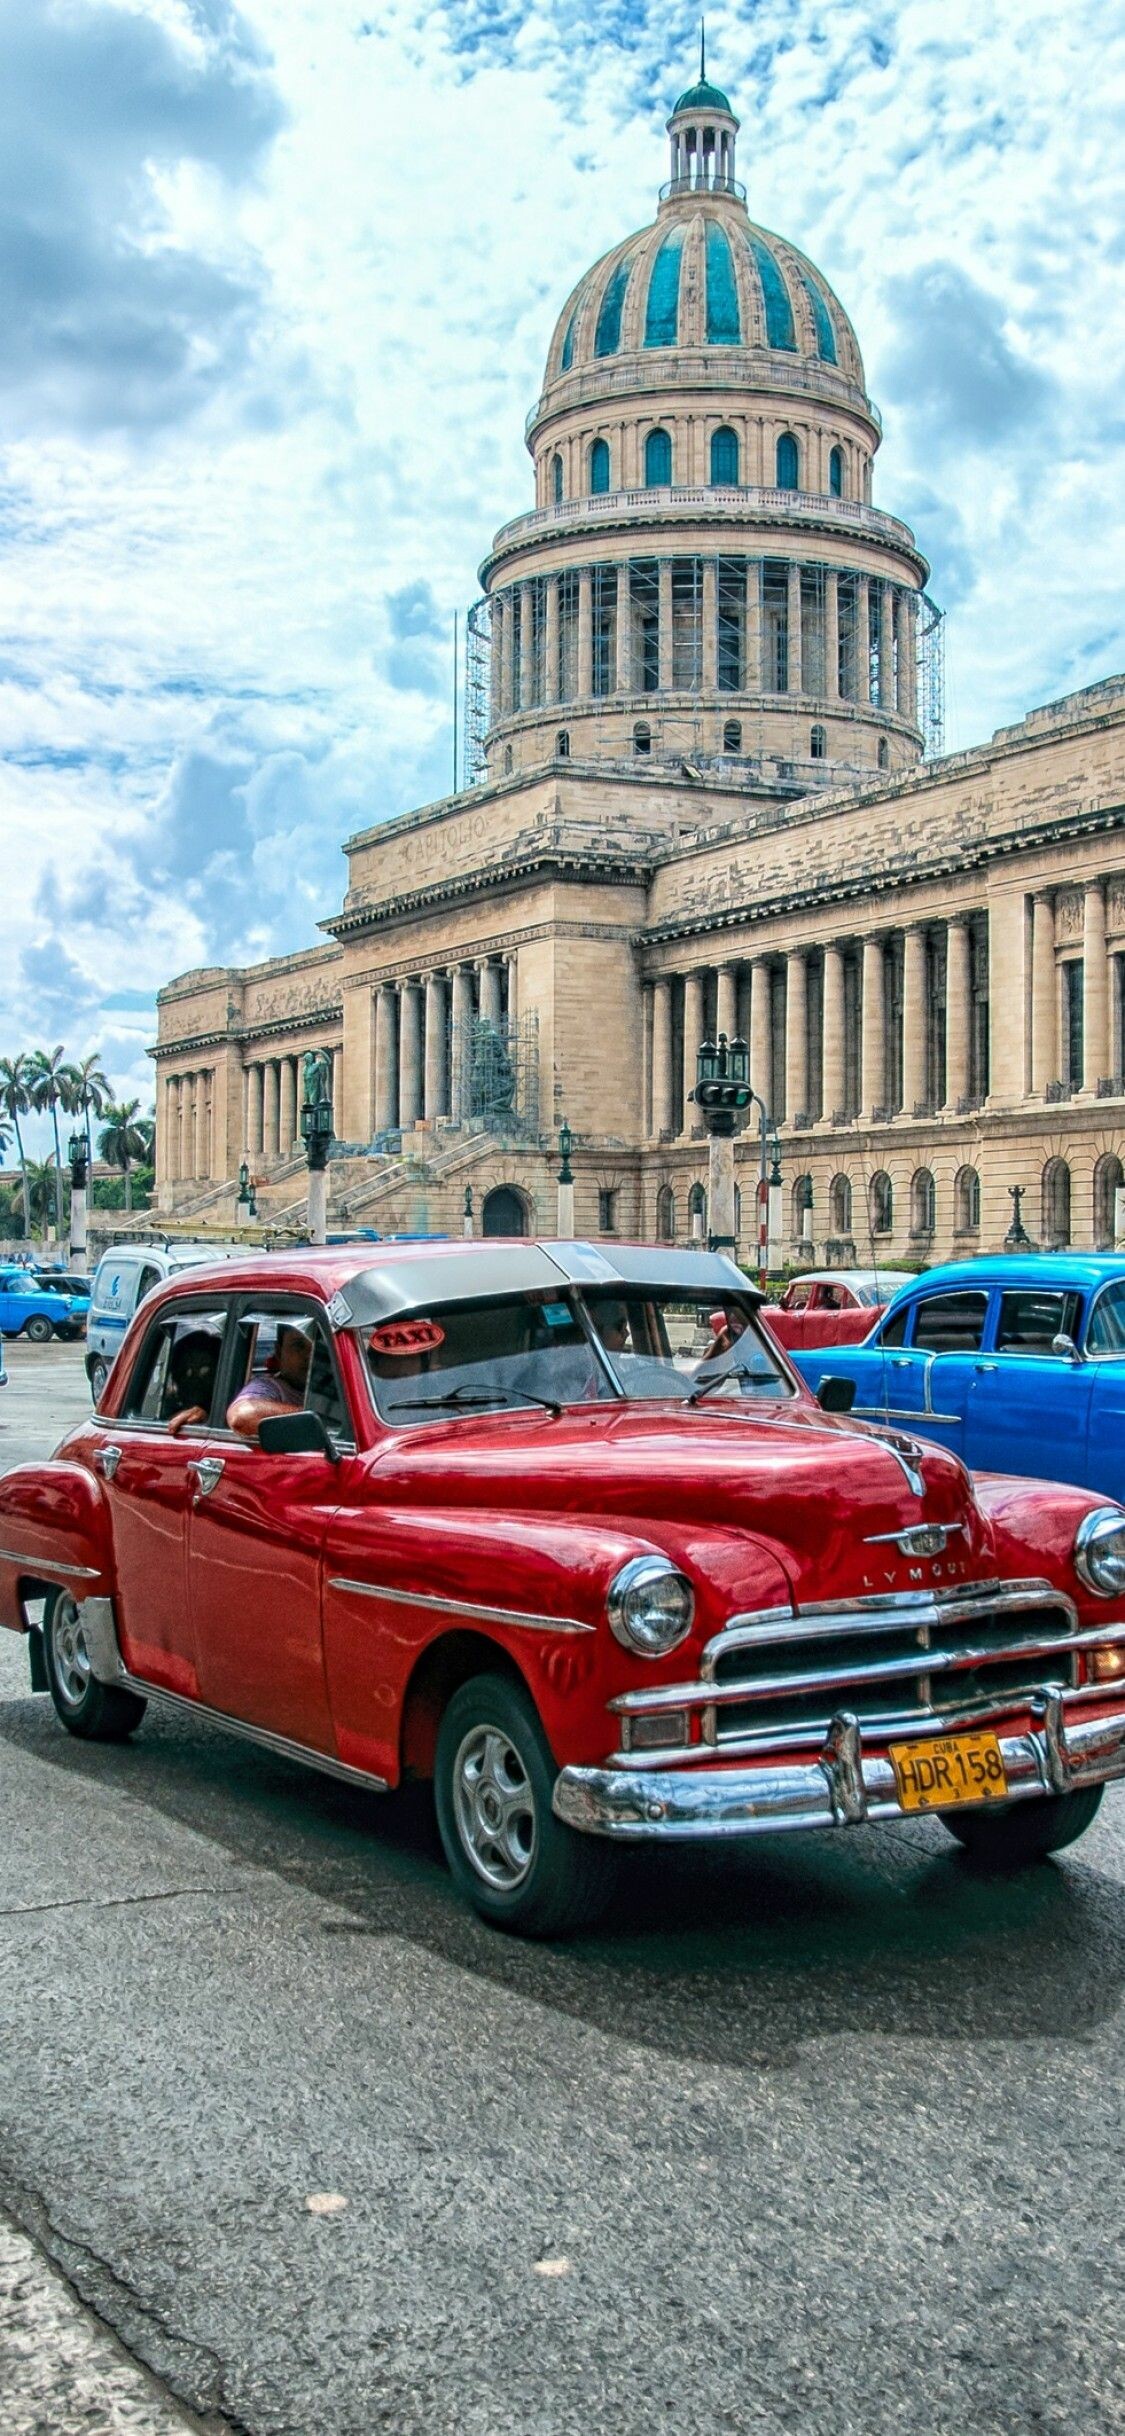 Cuba: Havana, the country's colorful capital, is known for the Spanish colonial architecture. 1130x2440 HD Background.